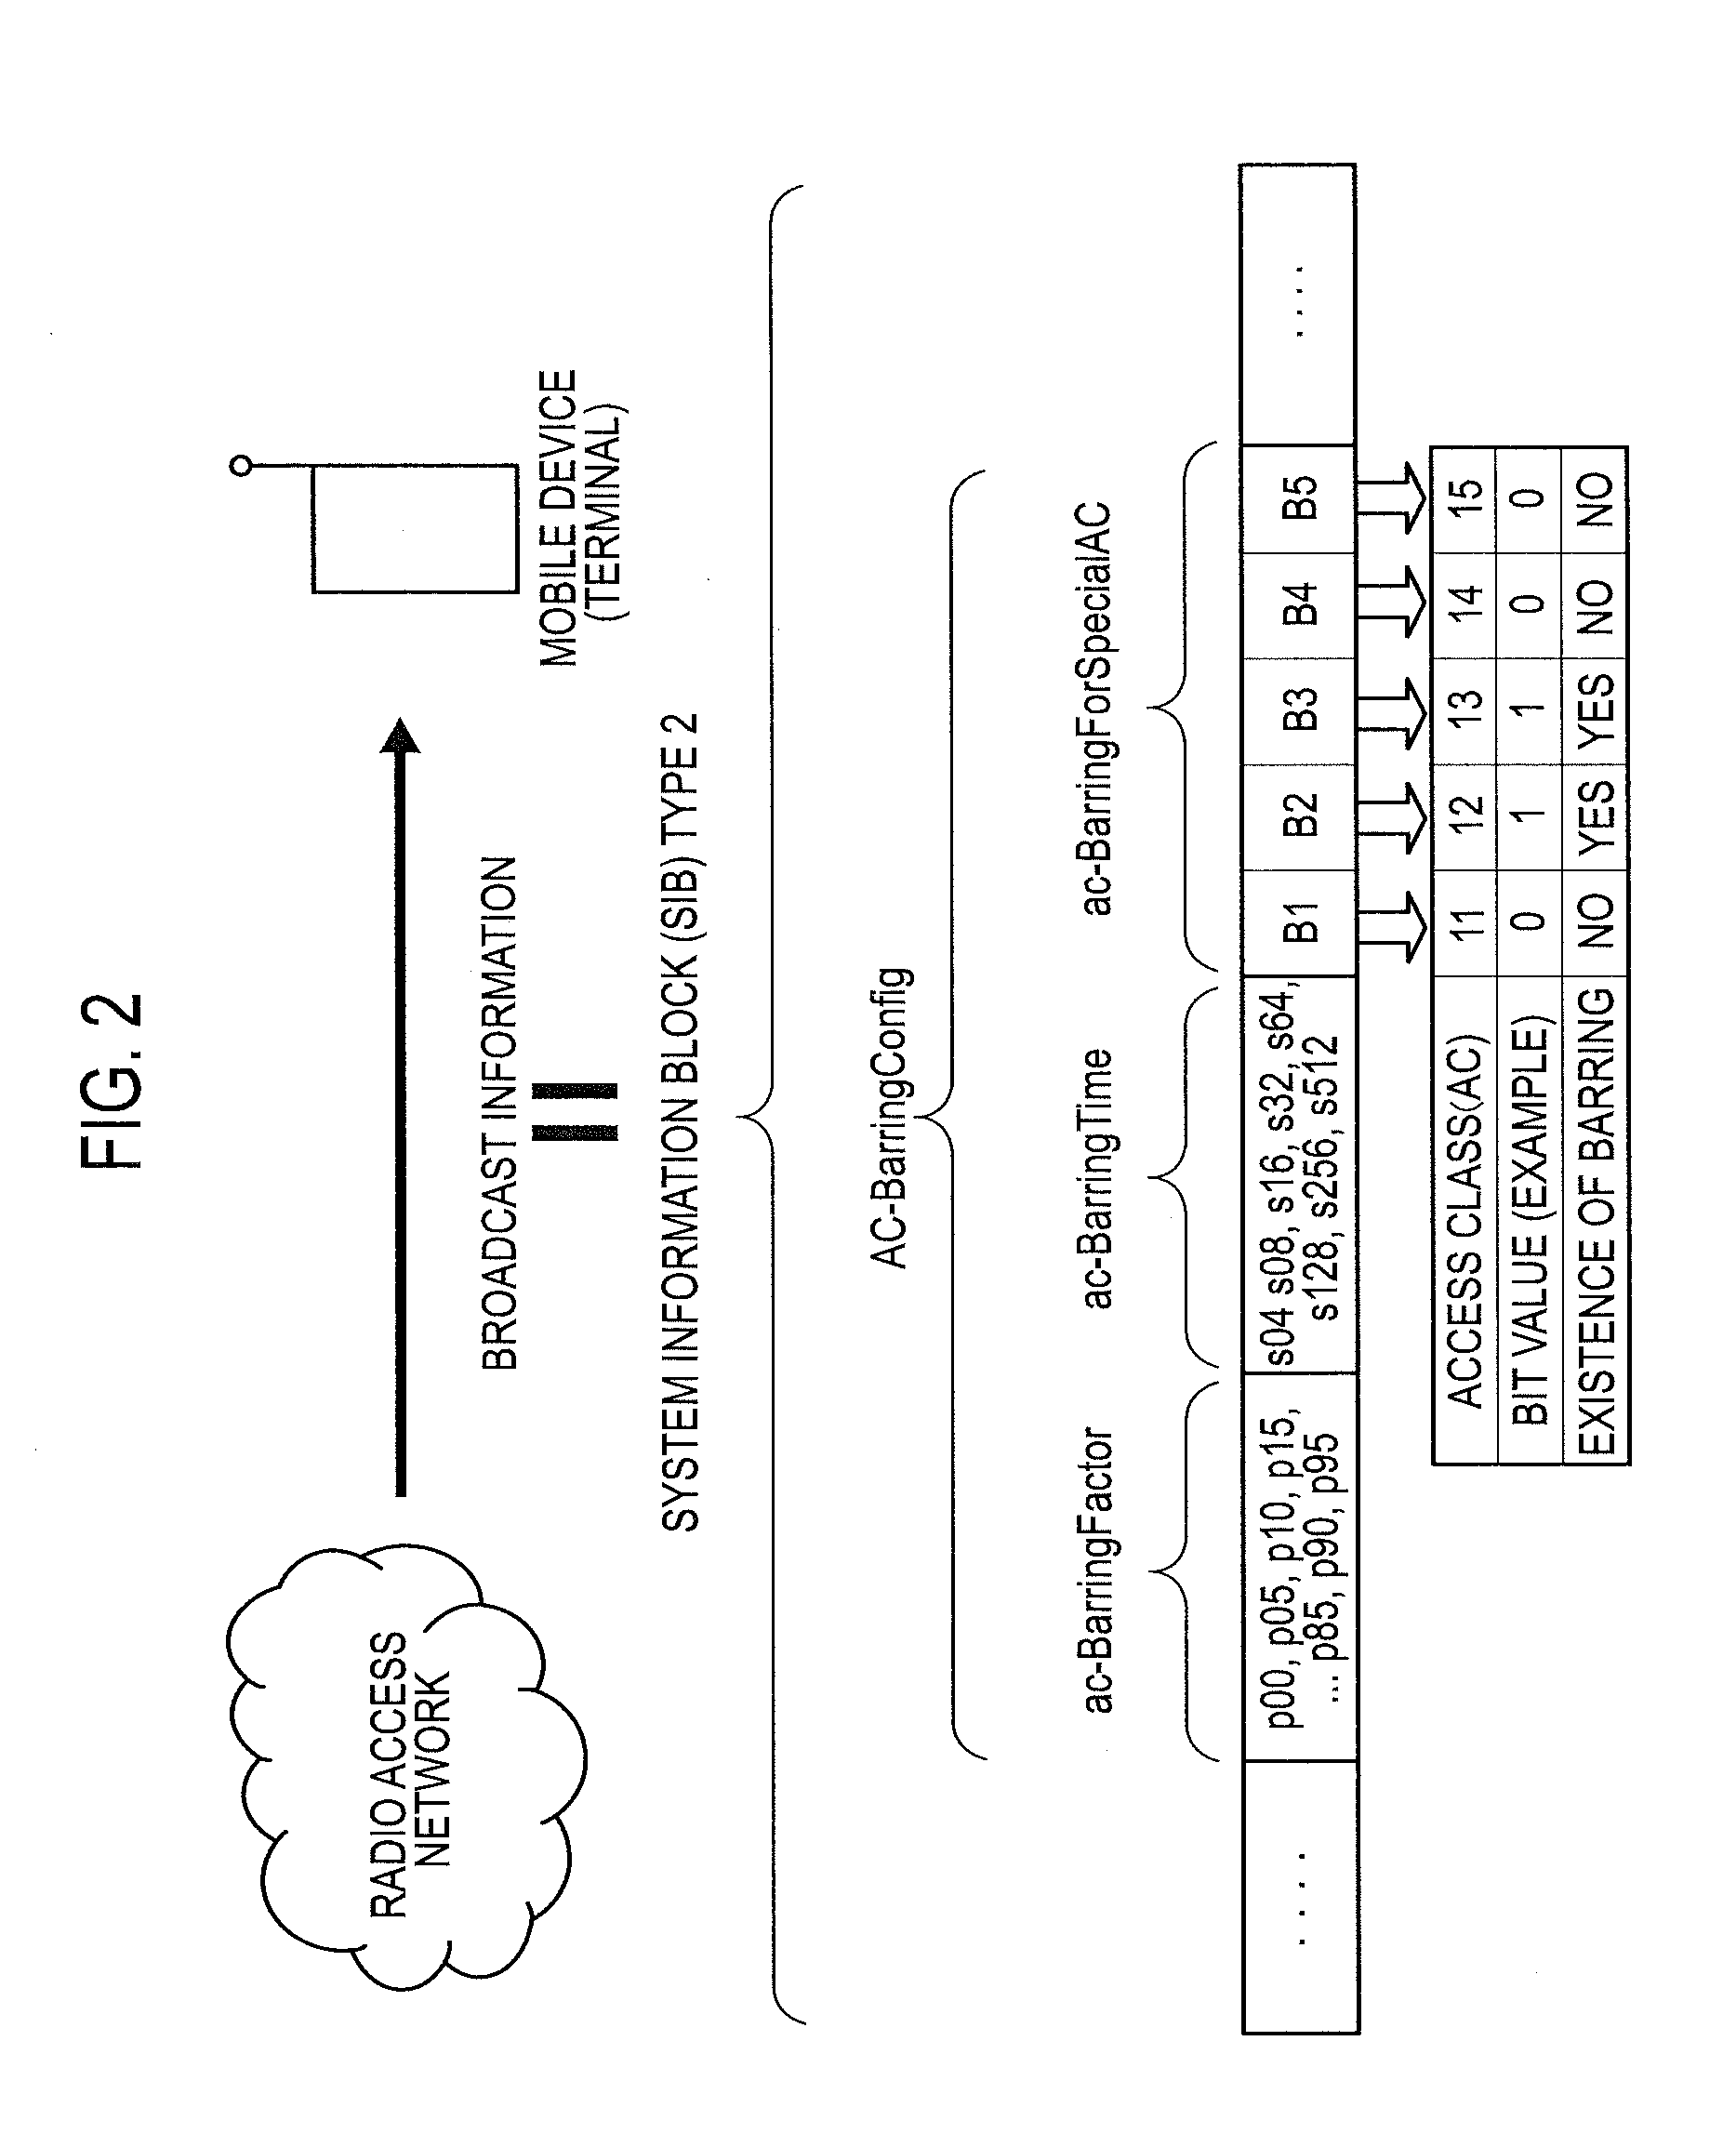 Method of barring network access, mobile device and processor